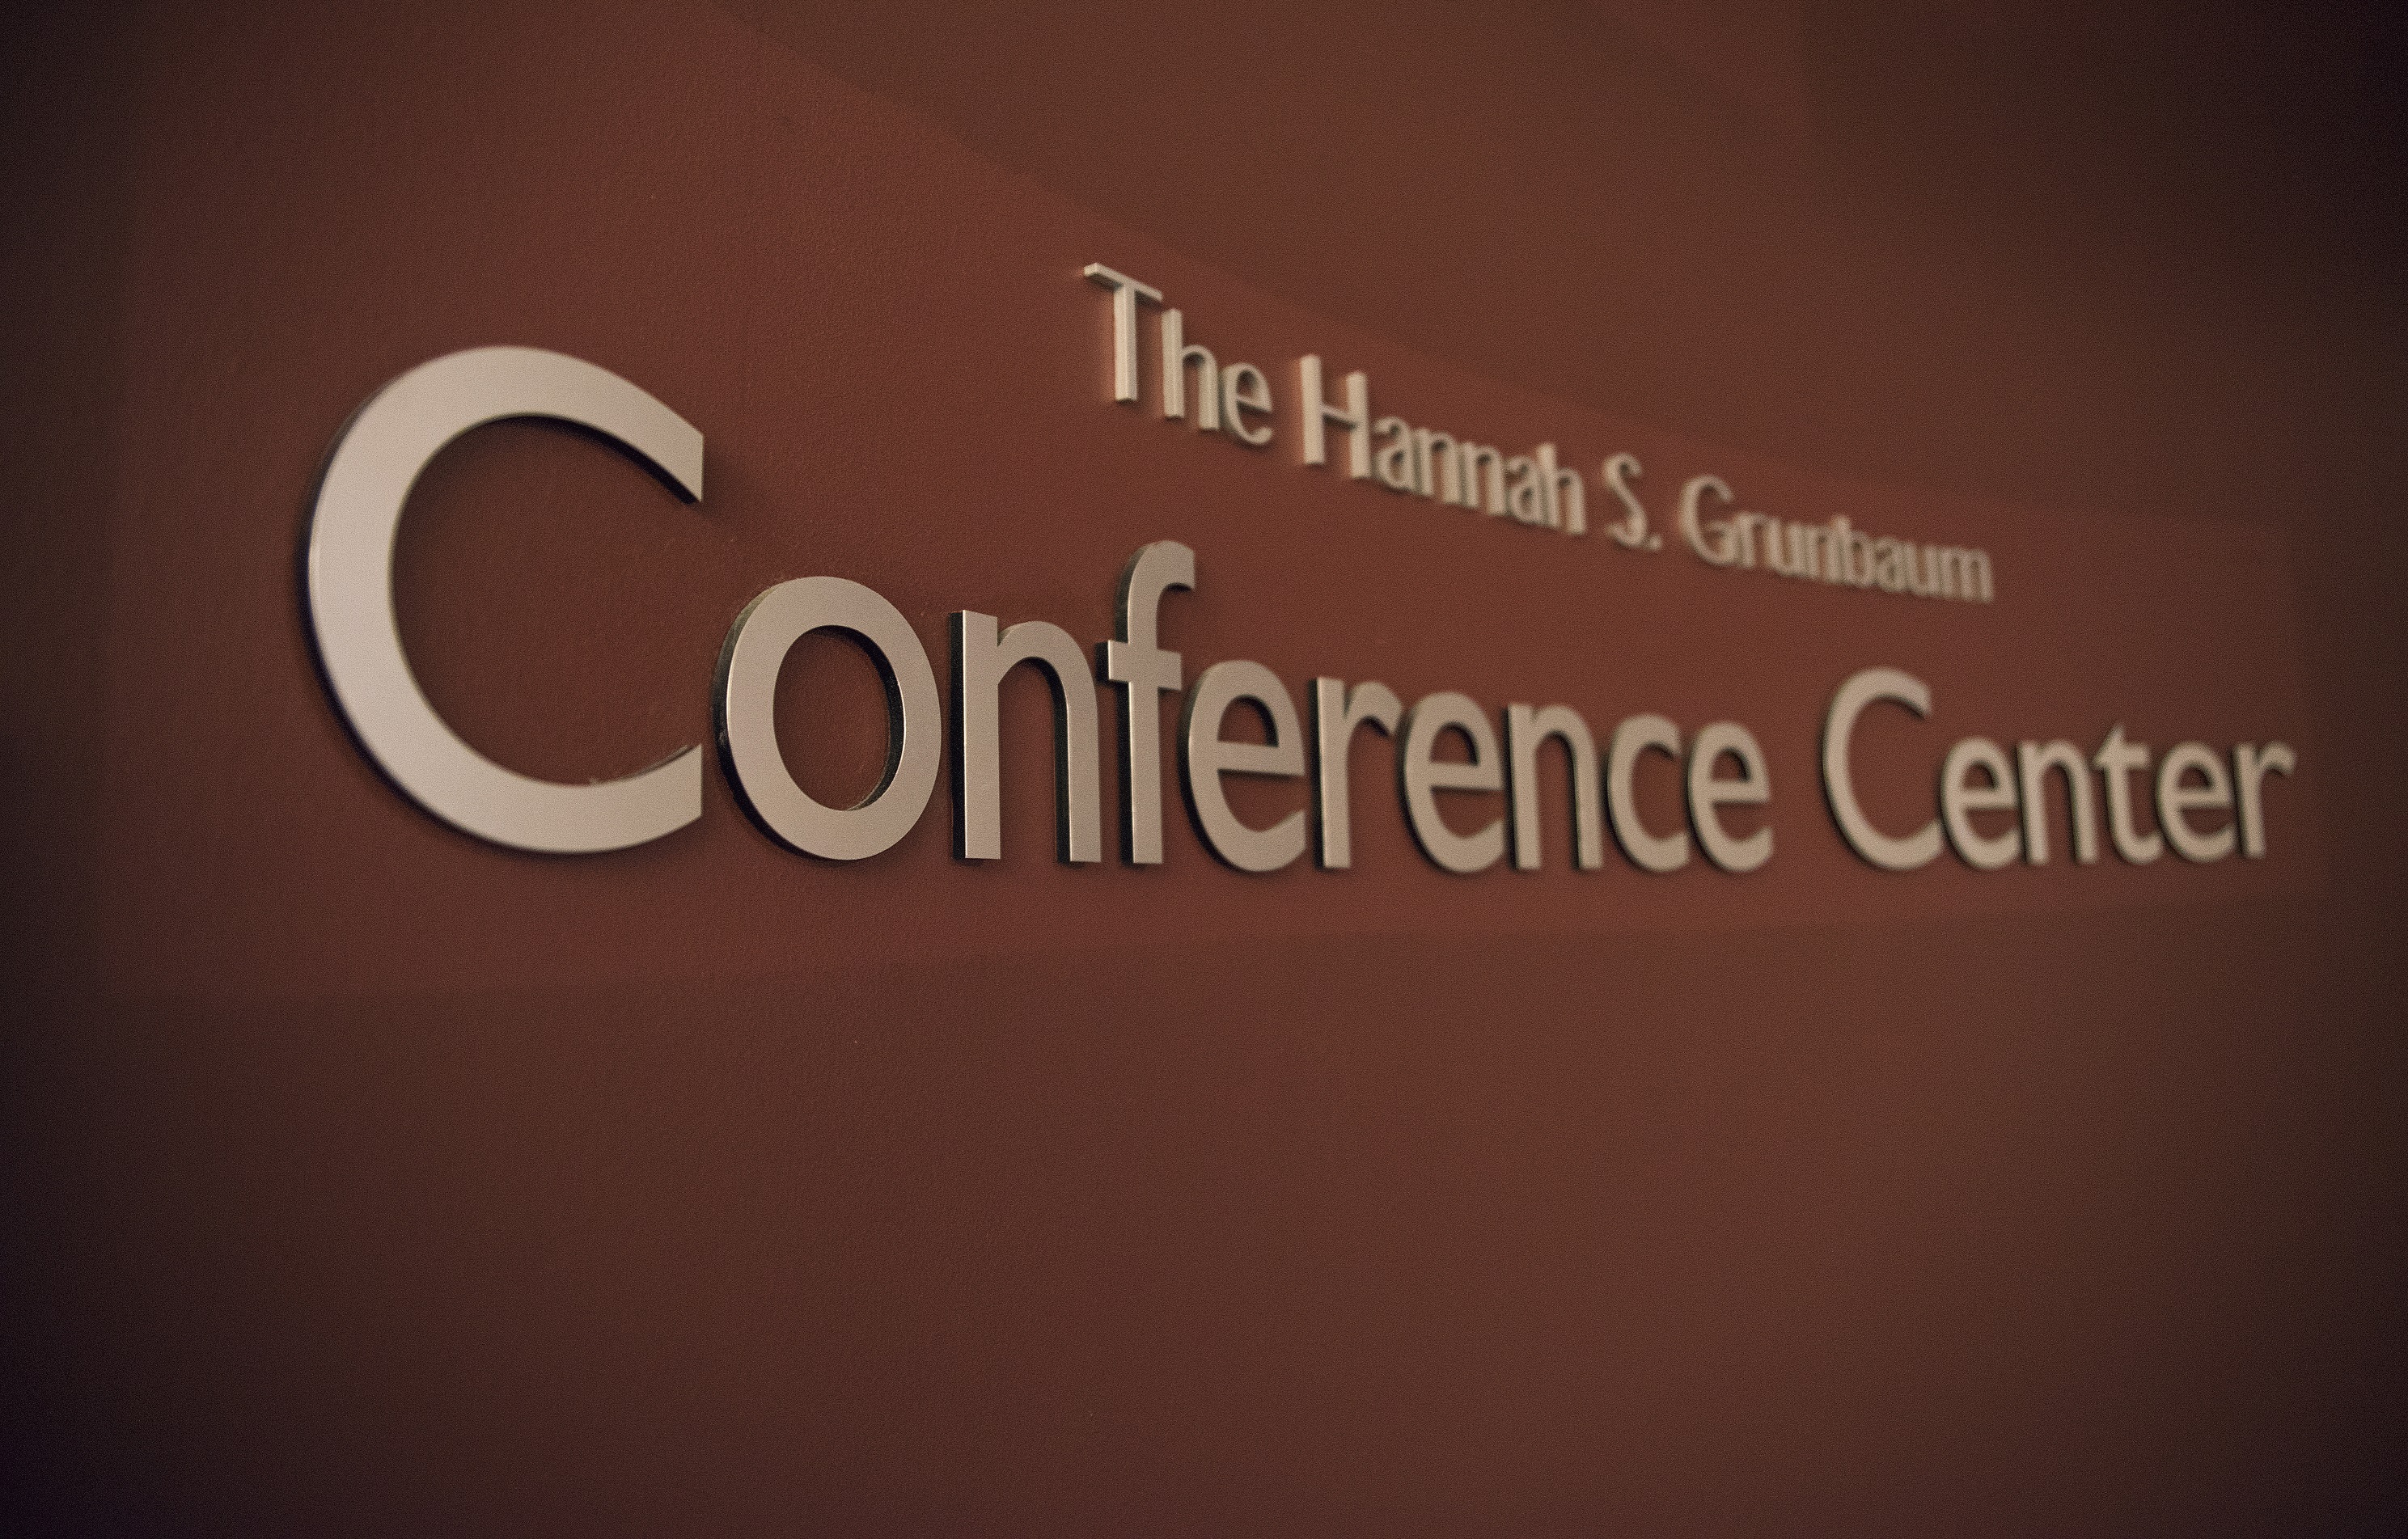 Picture of Hannah S. Grunbaum Conference Center sign.